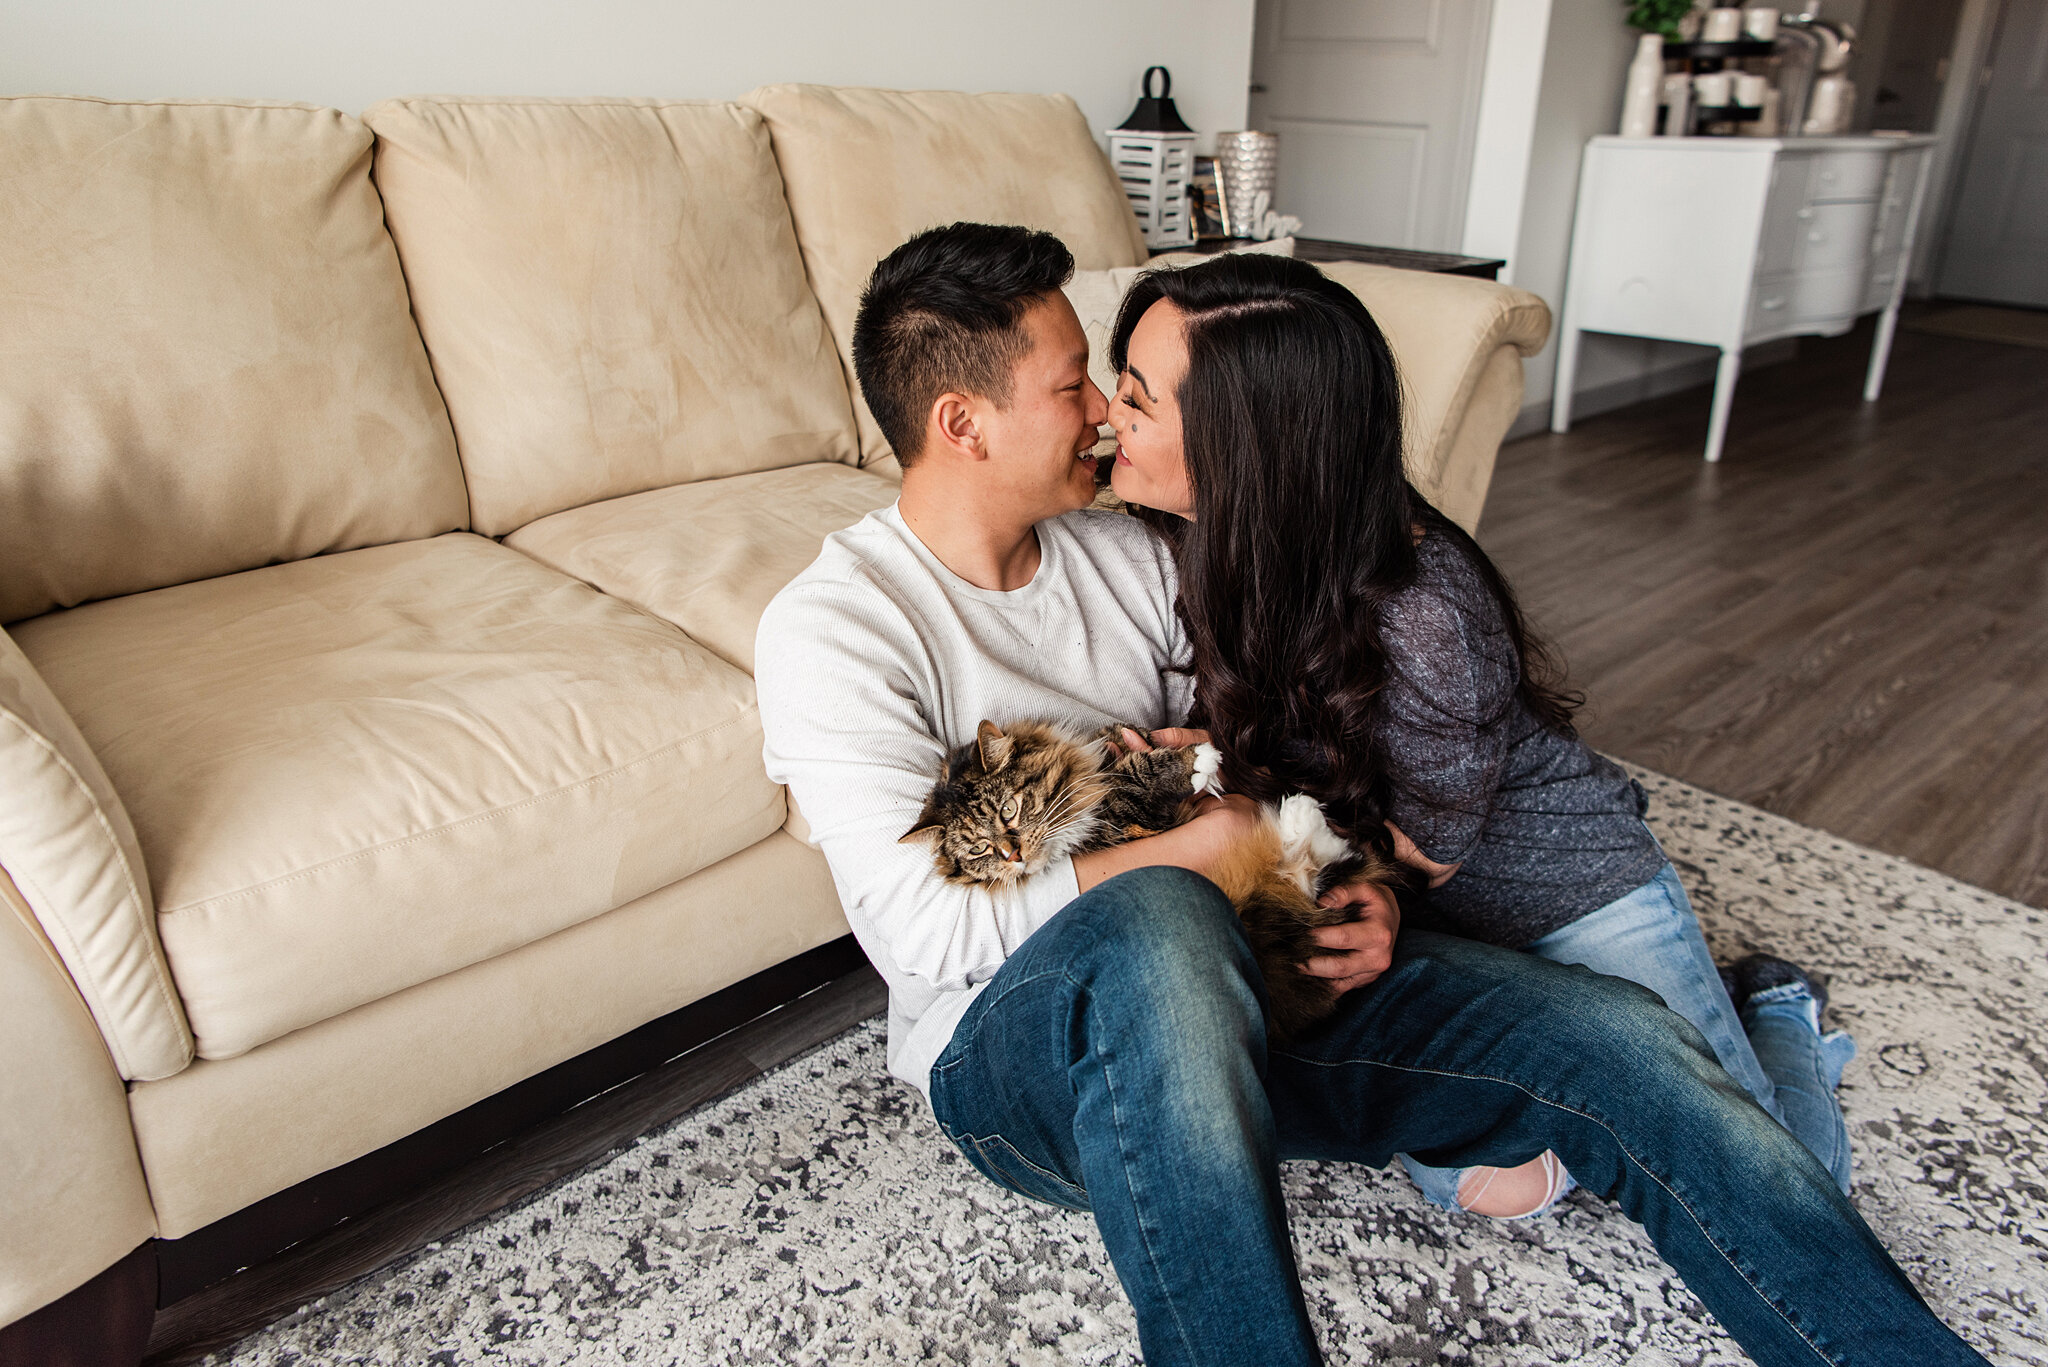 In_Home_Rochester_Couples_Session_JILL_STUDIO_Rochester_NY_Photographer_4060.jpg